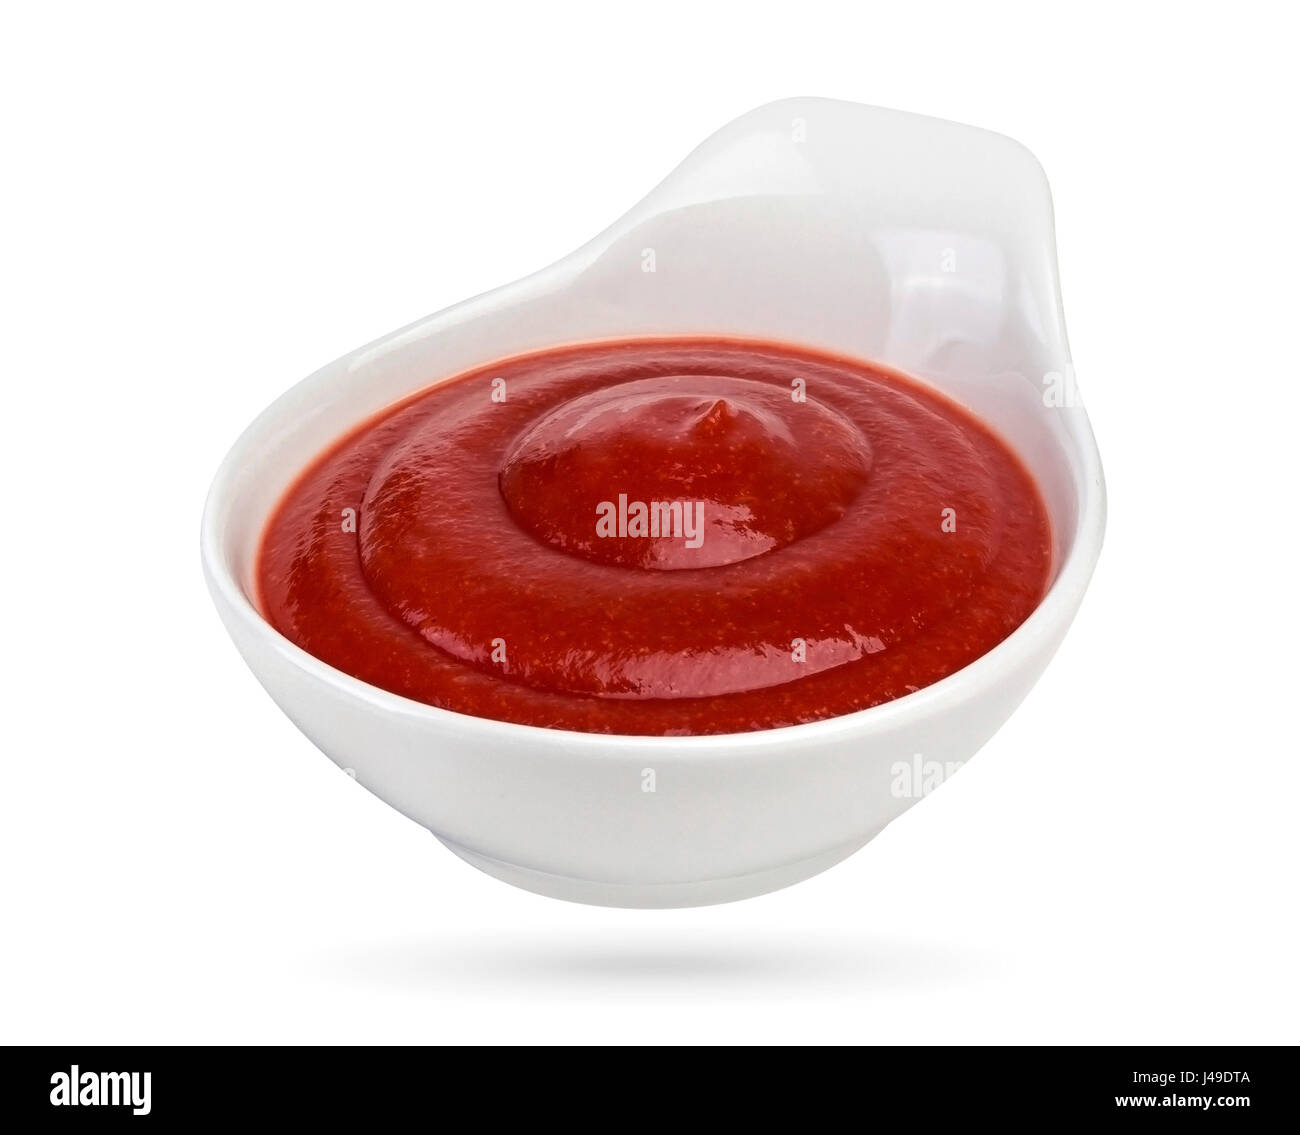 Sauce tomate isolé sur fond blanc. Bol de ketchup. With clipping path. Banque D'Images